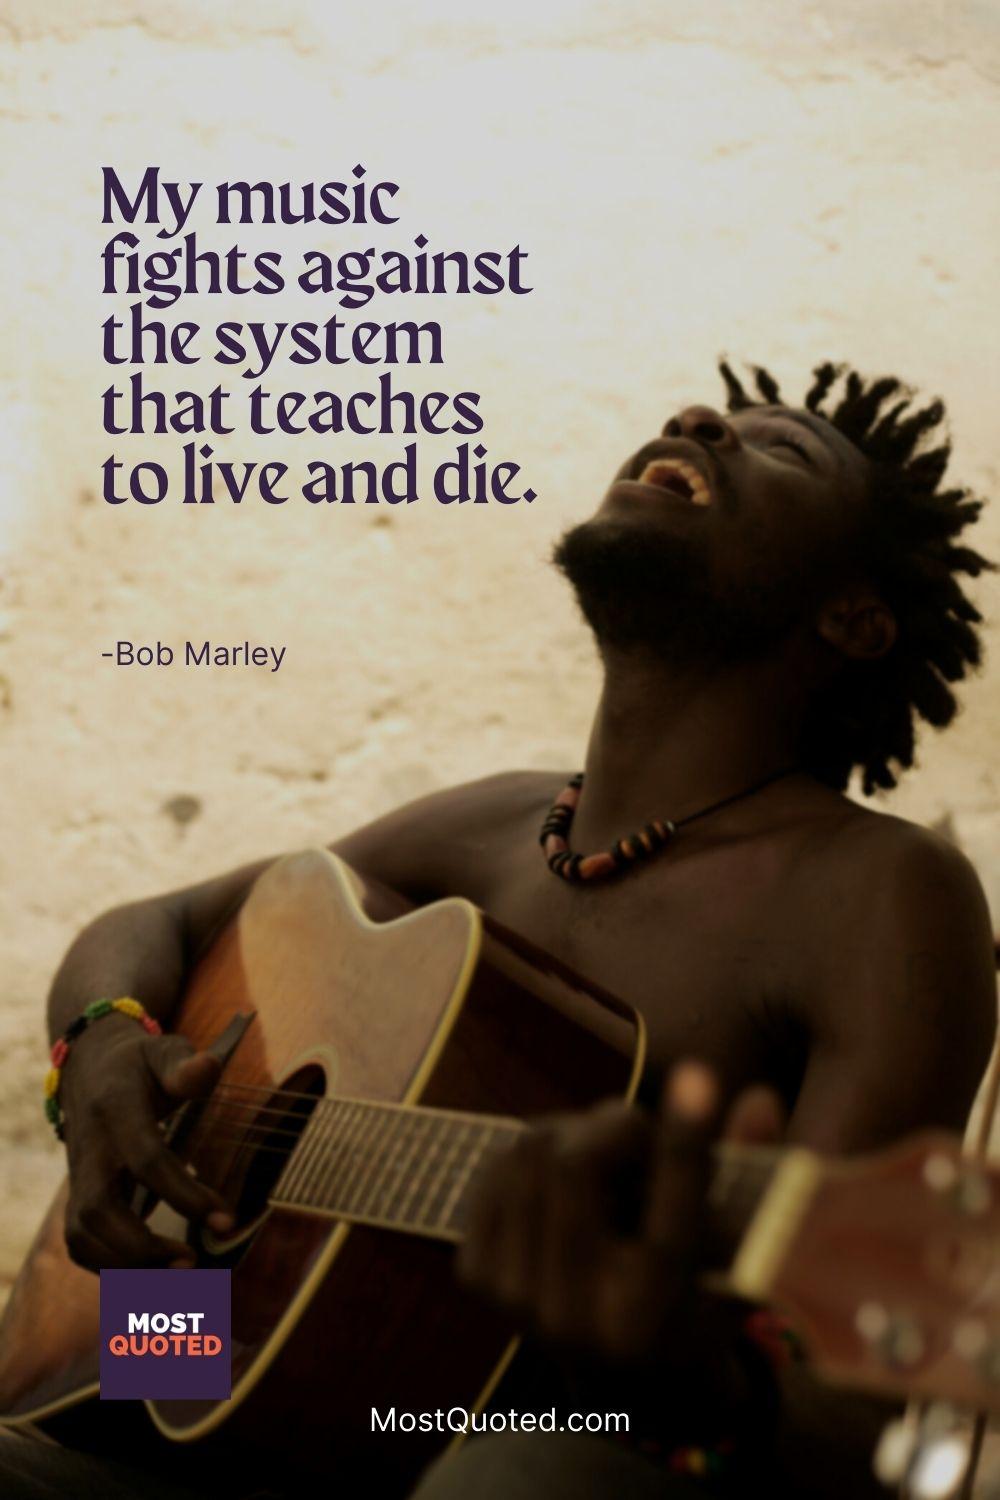 My music fights against the system that teaches to live and die. - Bob Marley